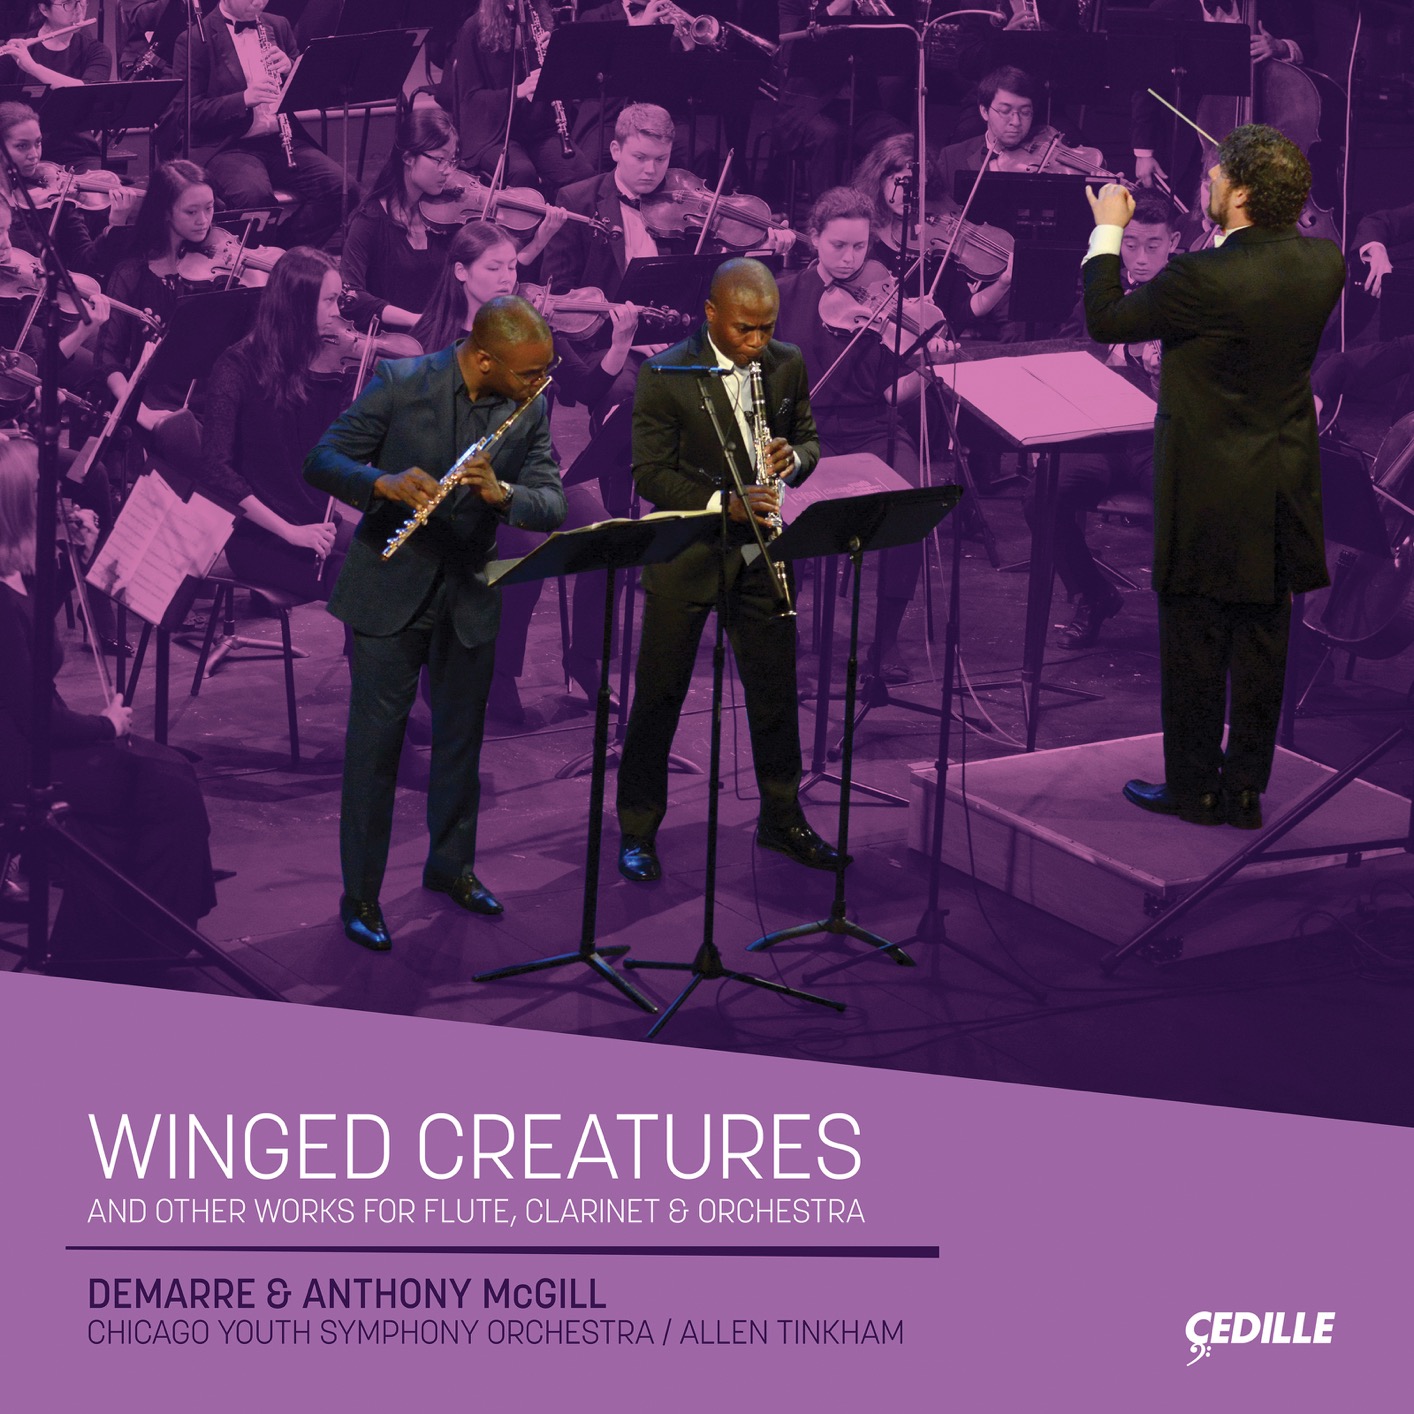 Demarre & Anthony McGill, Chicago Youth Symphony Orchestra & Allen Tinkham - Winged Creatures (2019) [FLAC 24bit/96kHz]